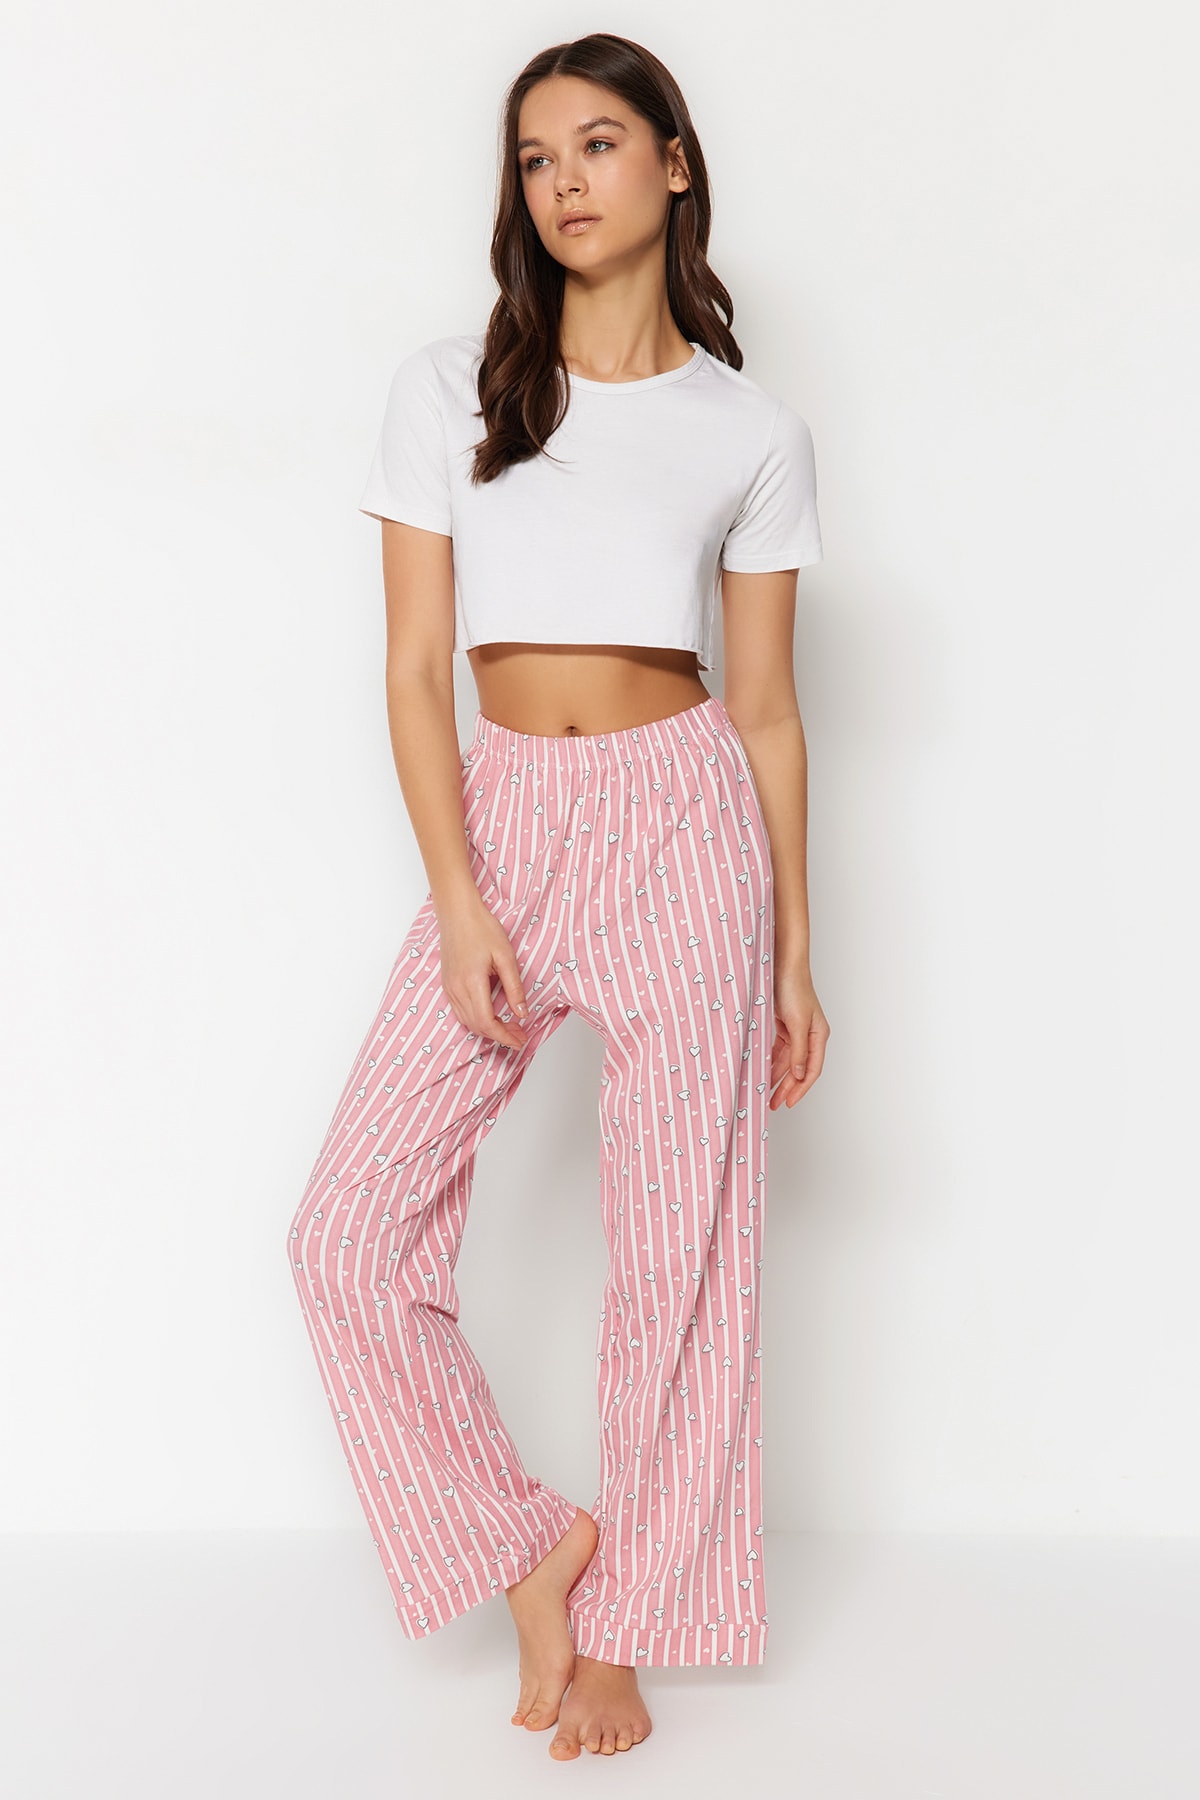 Trendyol Pink Cotton Striped Knitted Pajama Bottoms